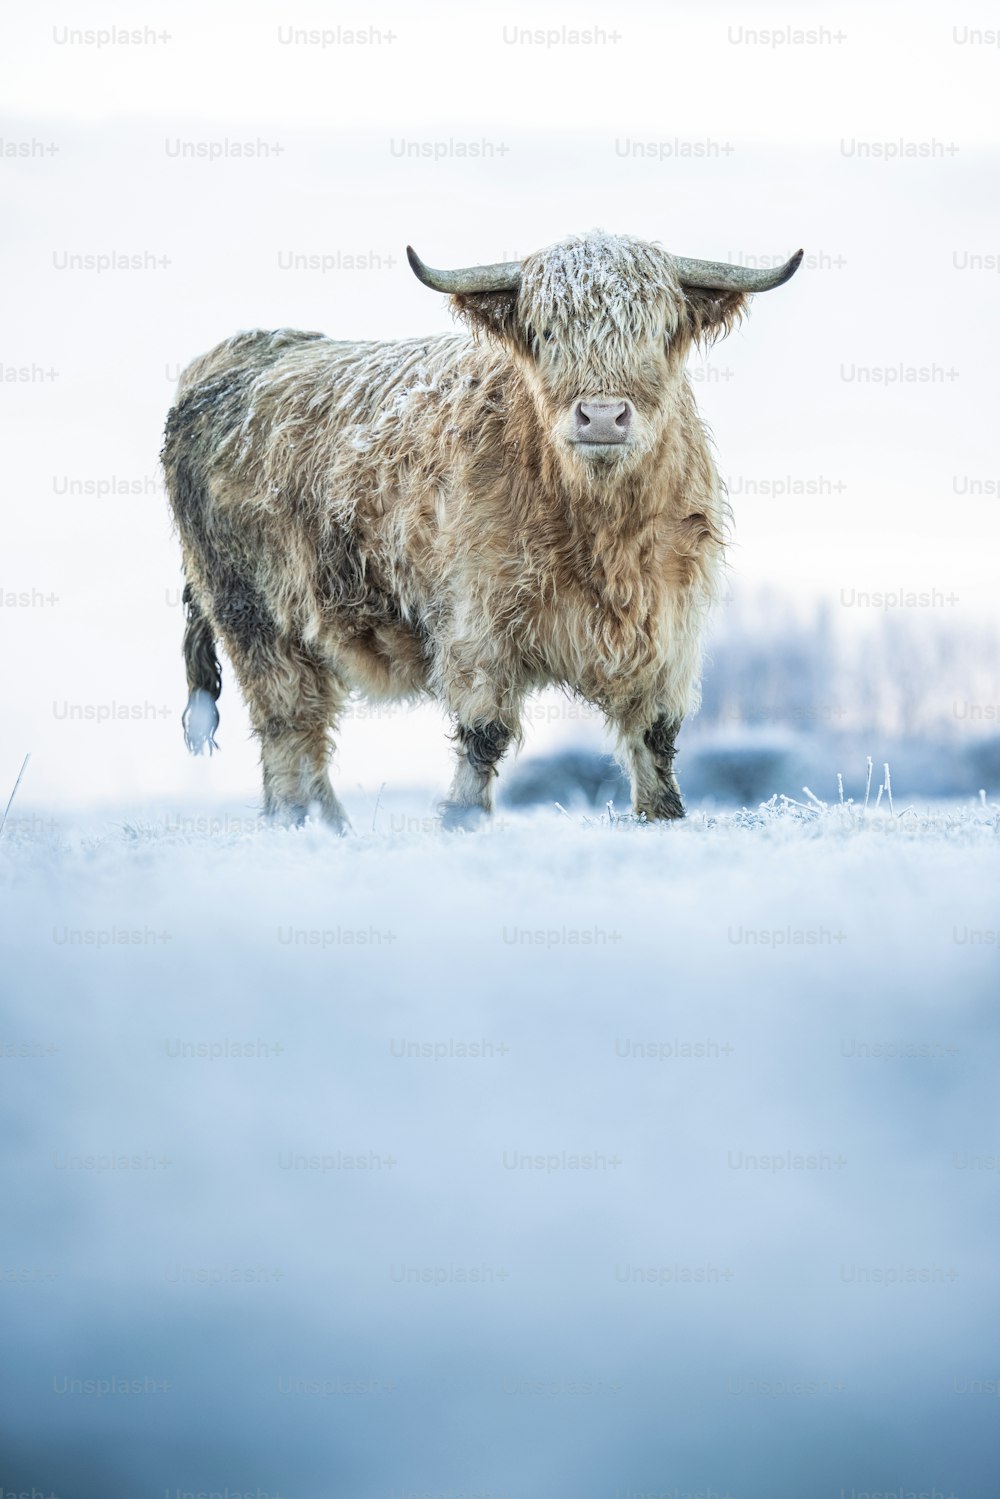 a brown and white cow standing in the snow